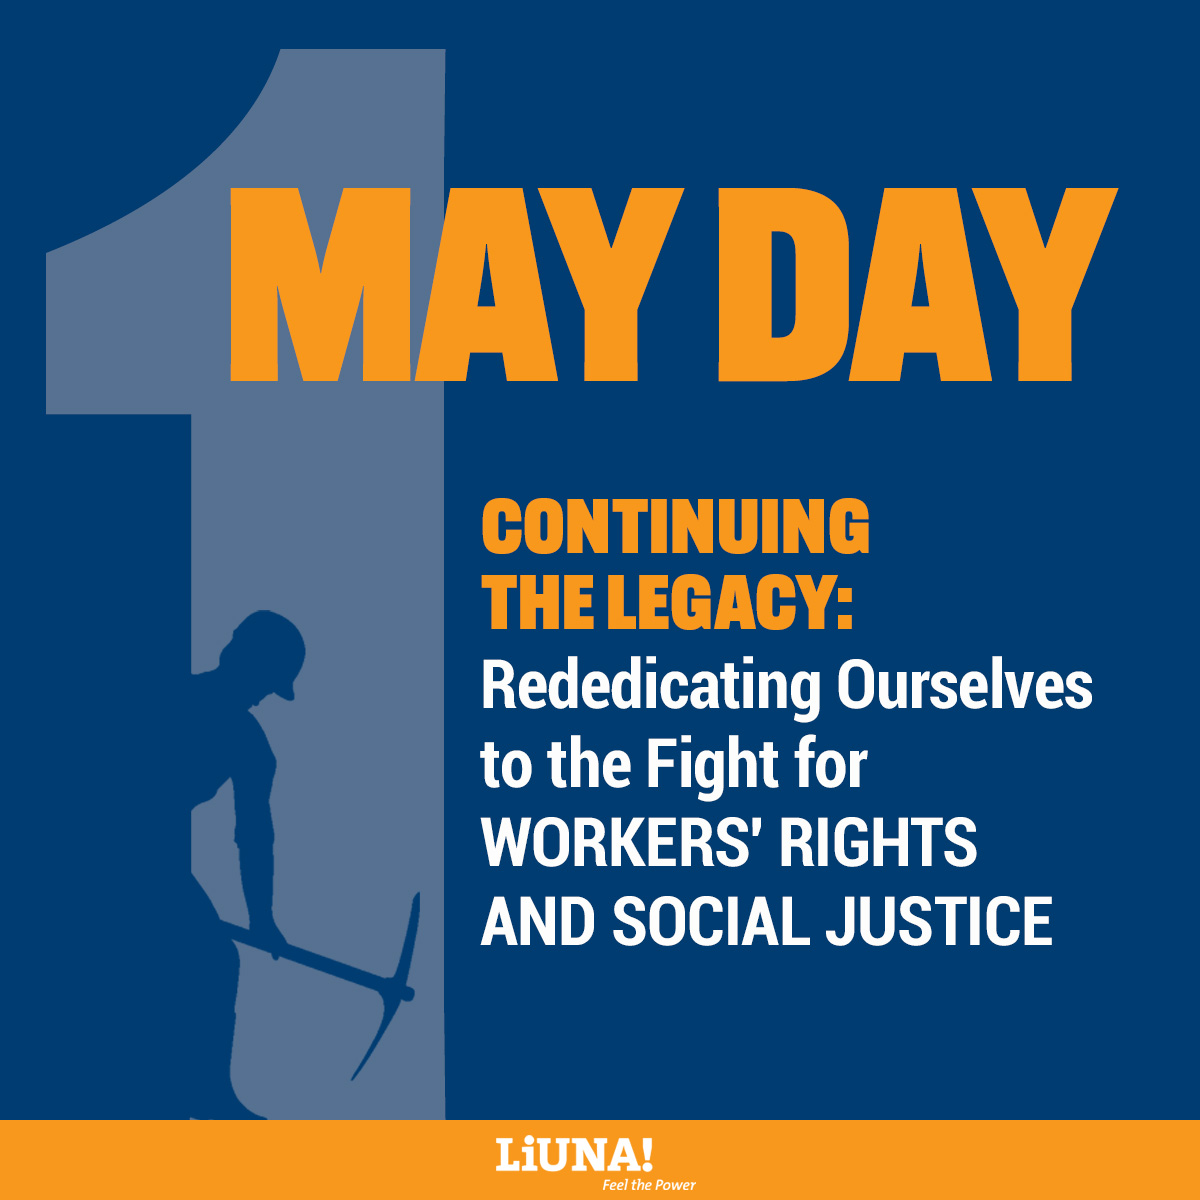 Today, we celebrate the hard-won victories of laborers past and present. Together, we stand strong in solidarity for a fairer, brighter future. ✊

#LIUNA #LIUNABuilds #Solidarity #FeelThePower